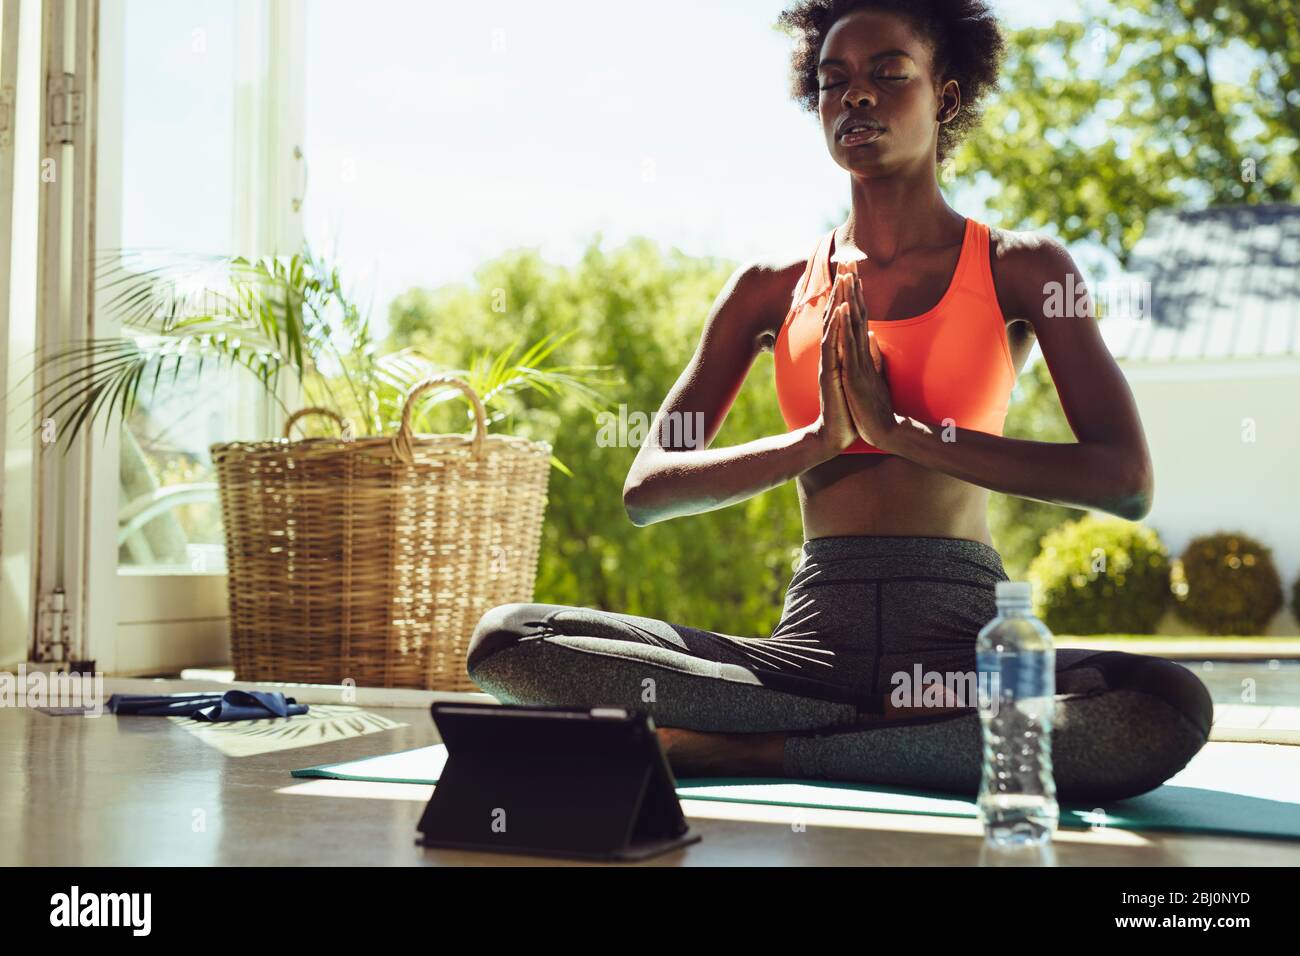 Healthy woman sitting on yoga meditation at home with a digital tablet in front. Fitness woman in sportswear meditating in lotus yoga pose indoors. Stock Photo